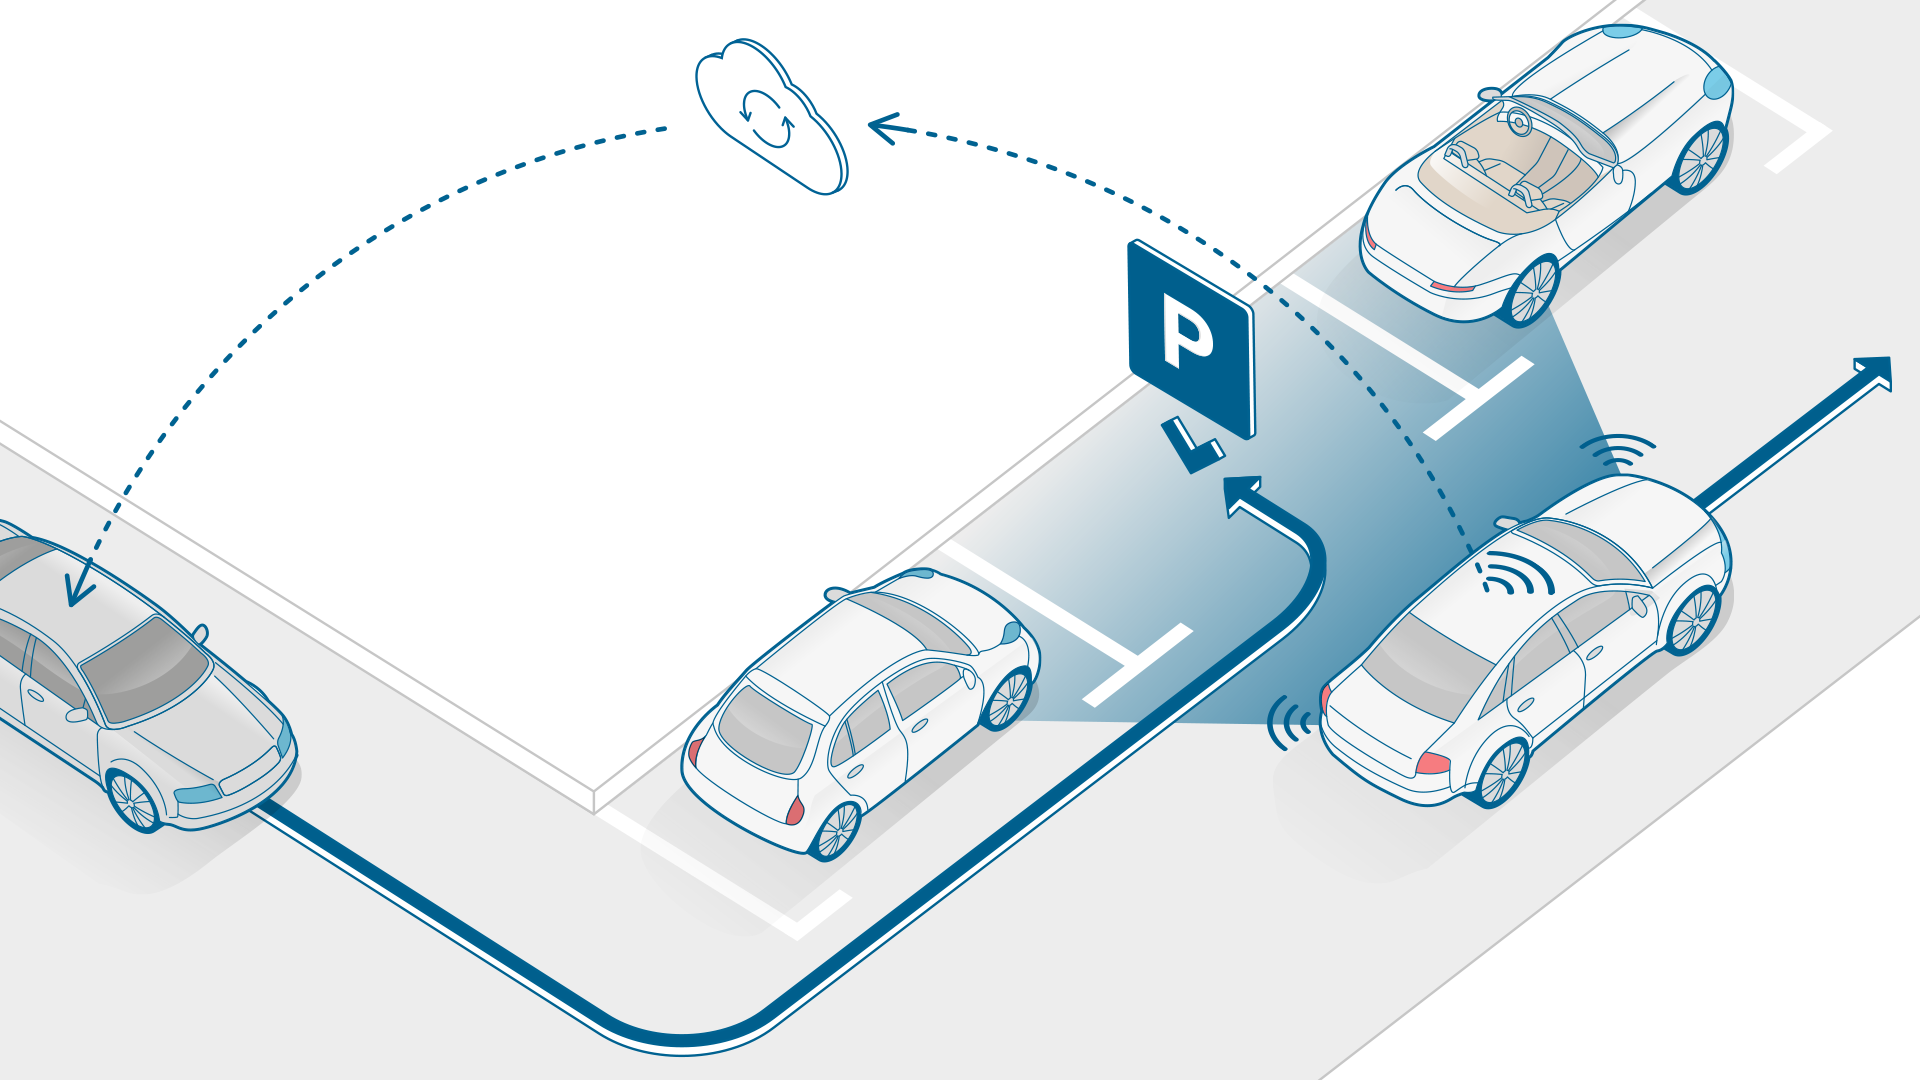 Bosch drives new mobility forward